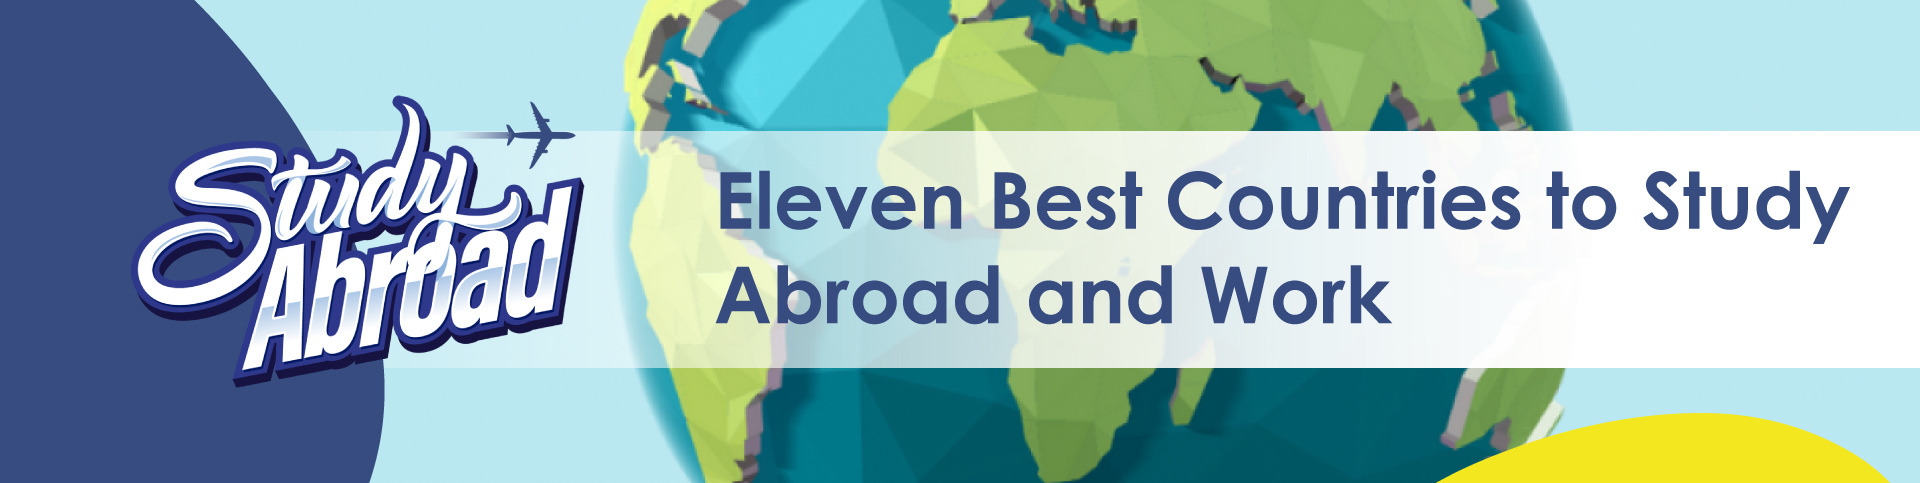 Eleven Best Countries To Study and Work Abroad